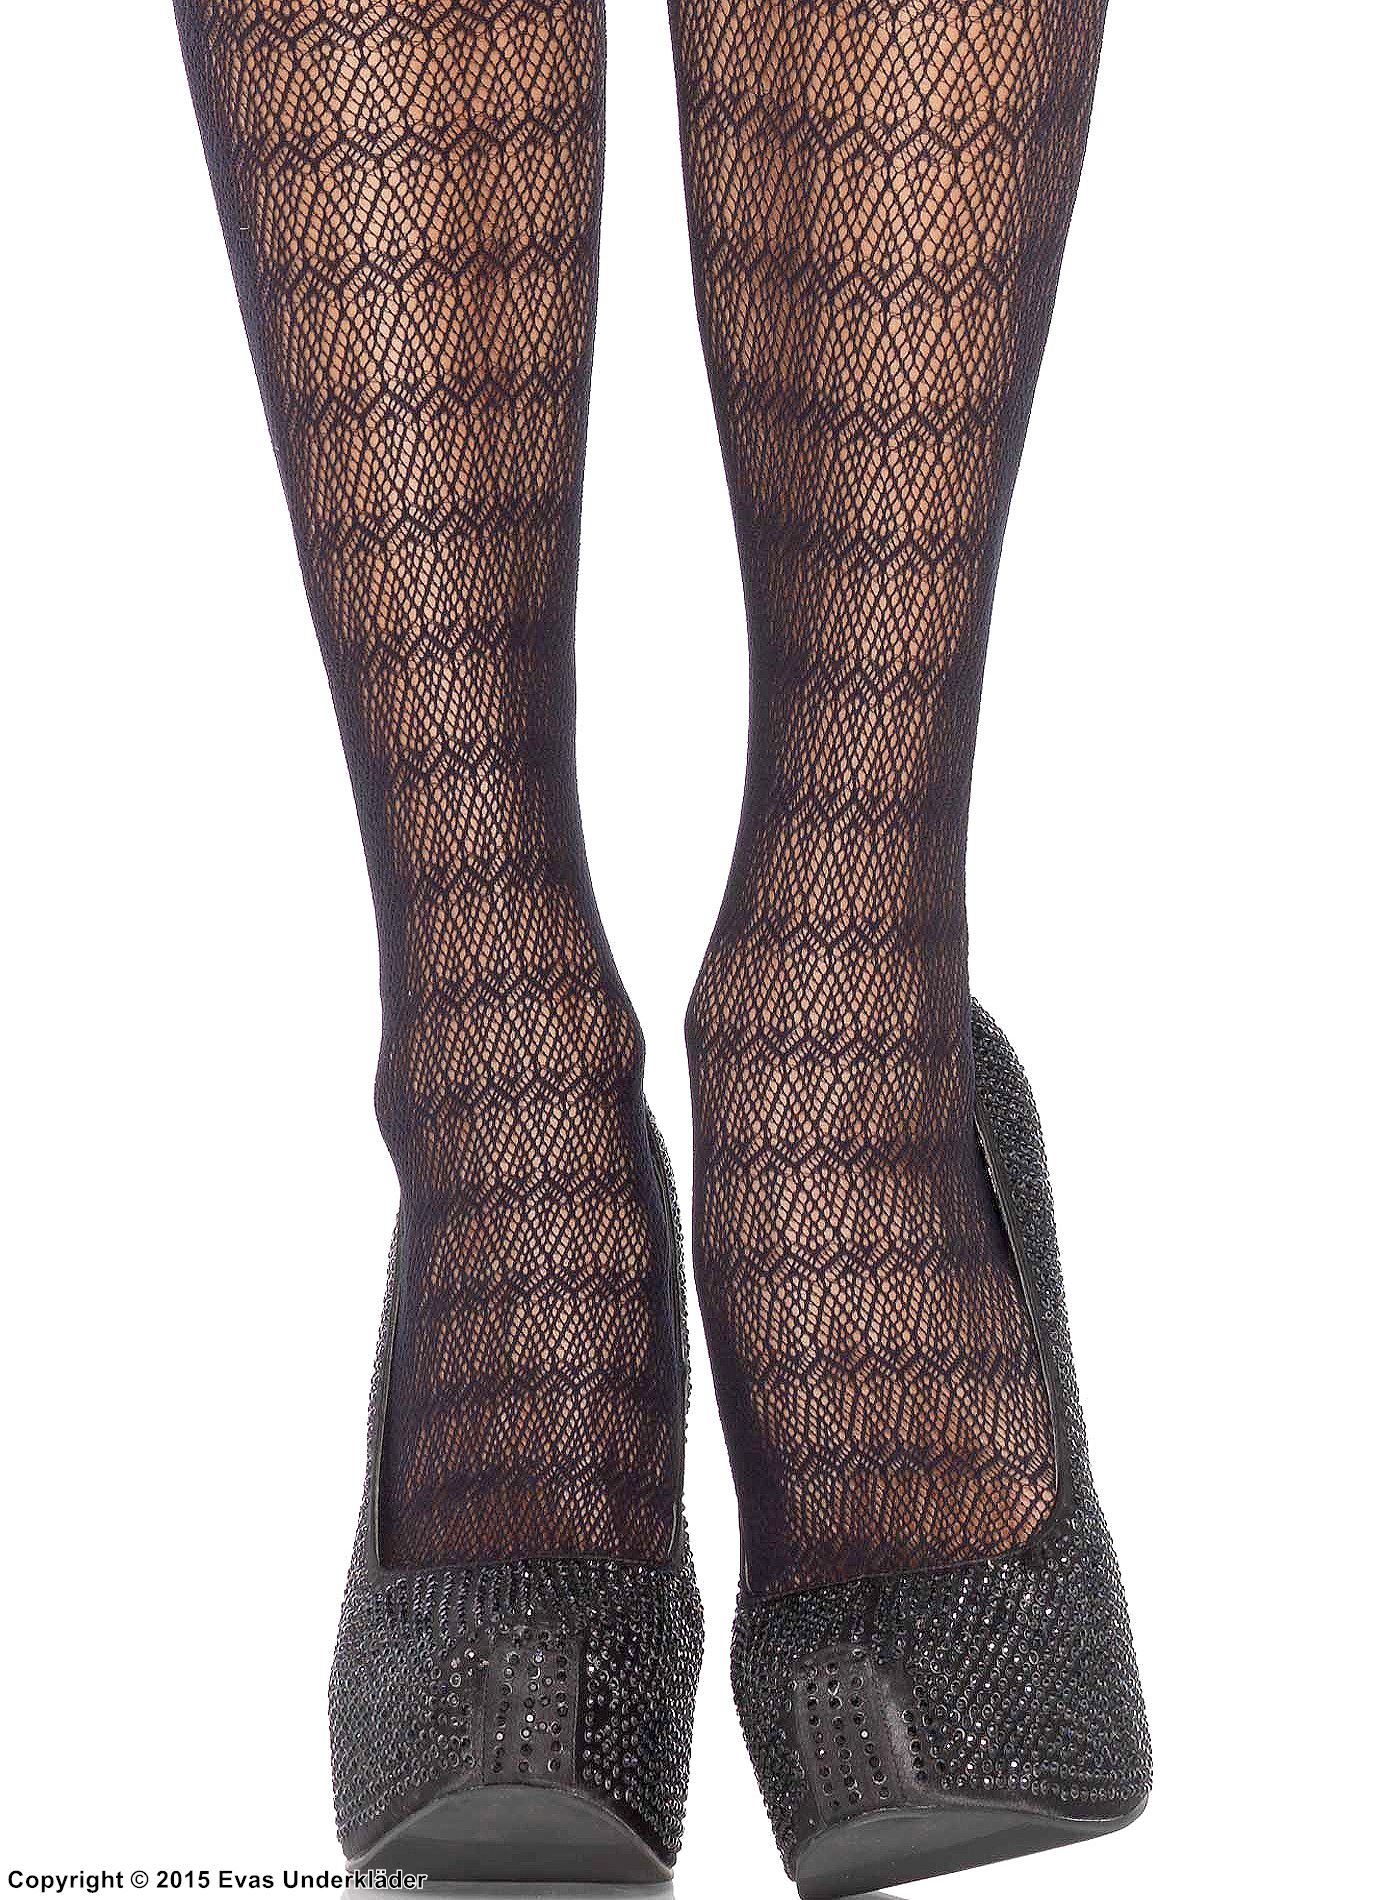 Patterned pantyhose, lace with plume pattern